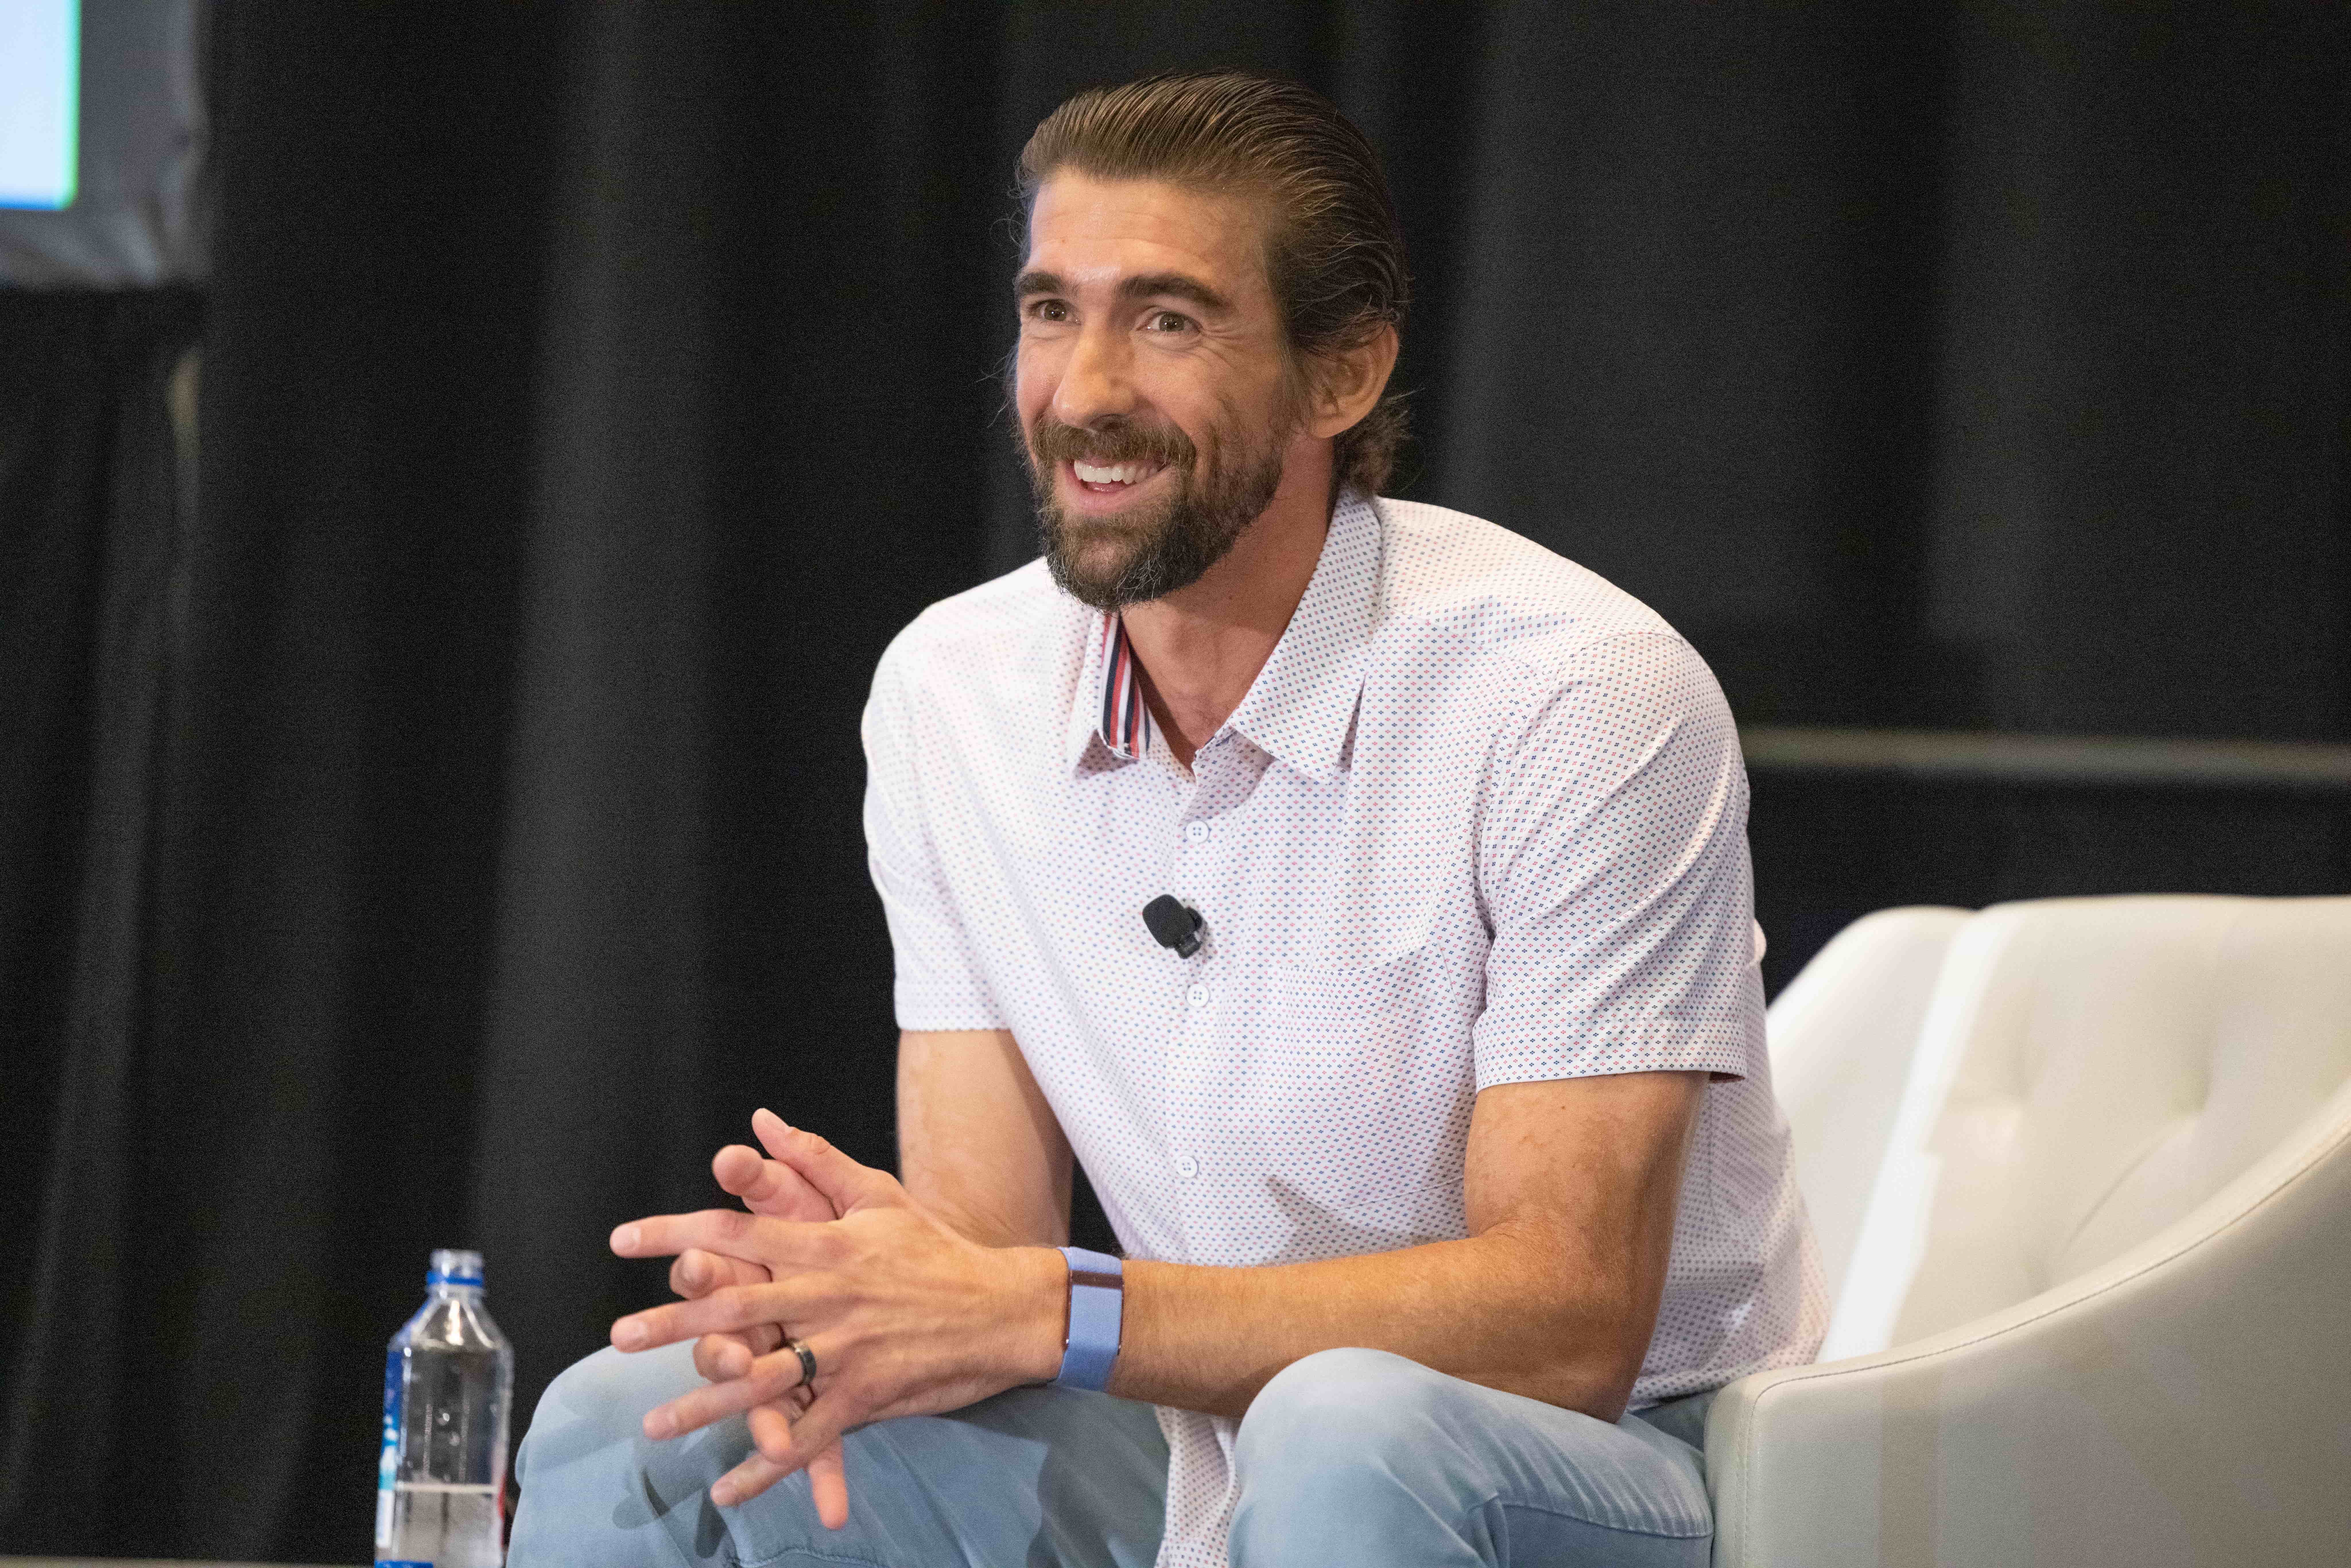 Opening Session Keynote Speaker Michael Phelps shares stories, including his favorite Olympic memories, the role of massage in his training and recovery, and how conversation about mental health is more important now than ever.